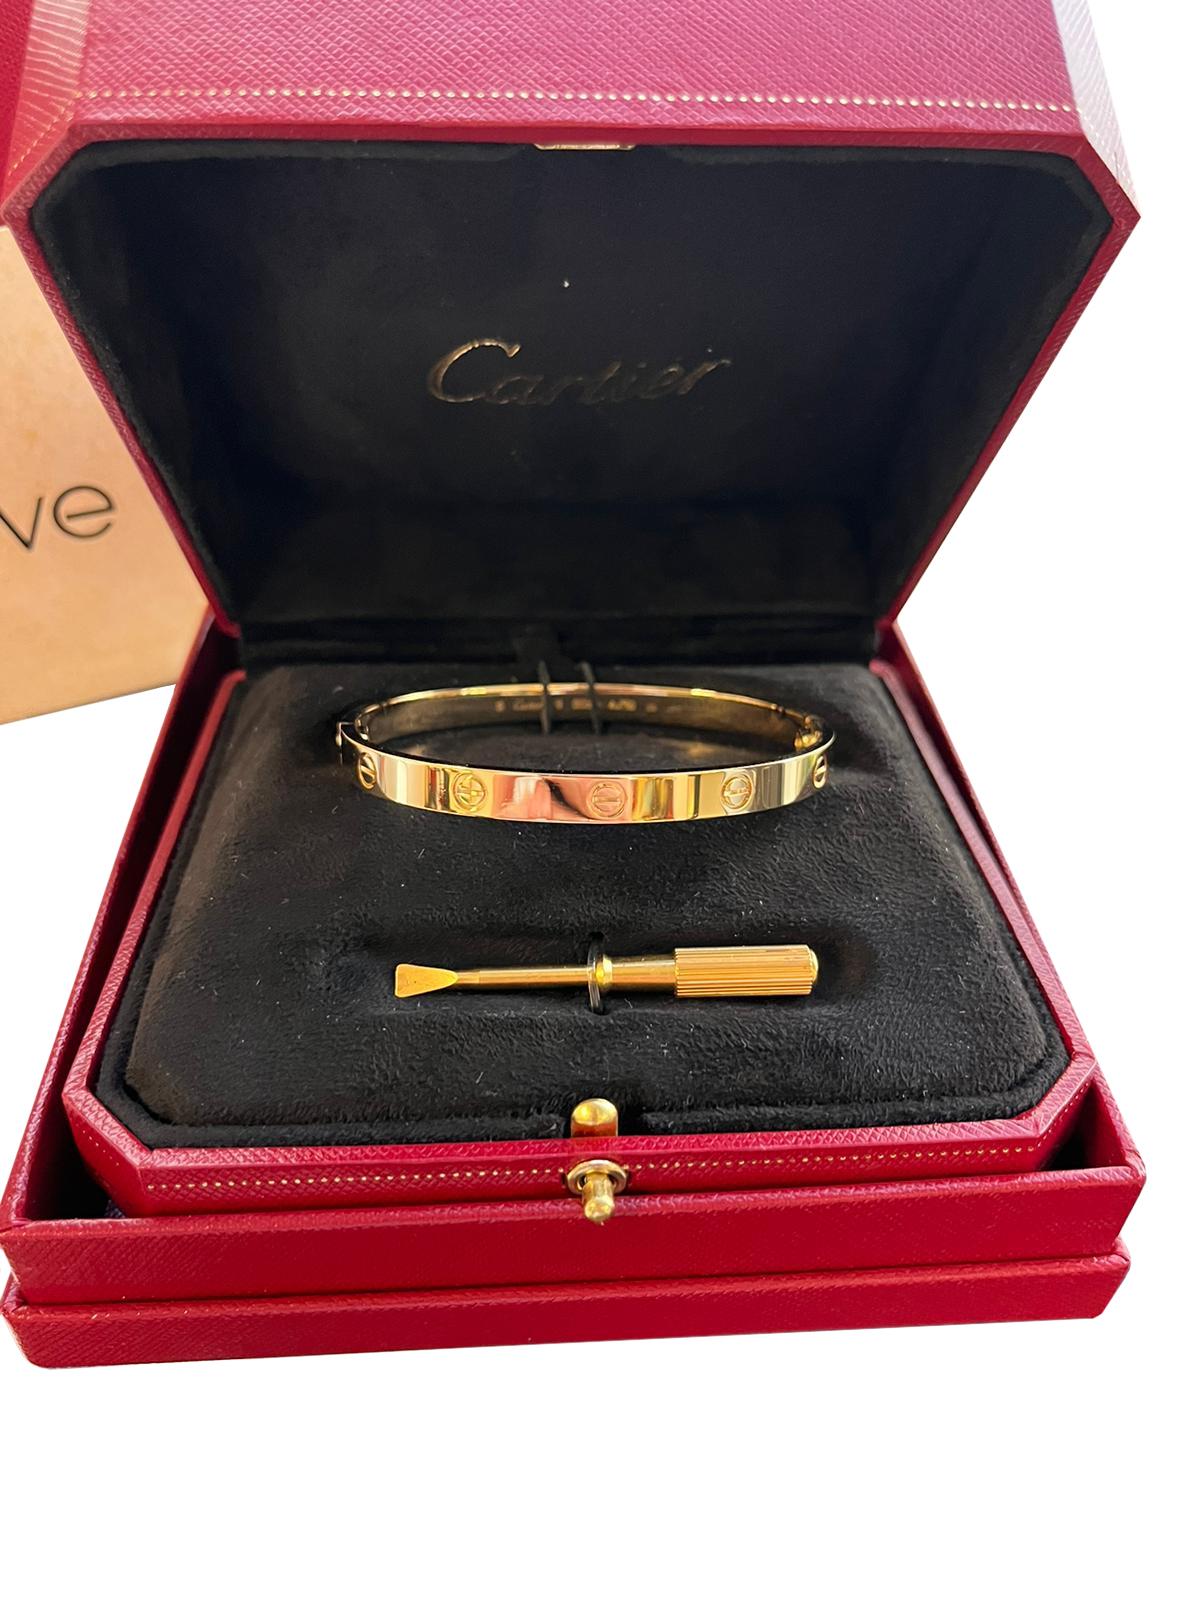 Cartier Love Bracelet 18K Yellow Gold Size 19 With Screwdriver Bangle For Sale 5